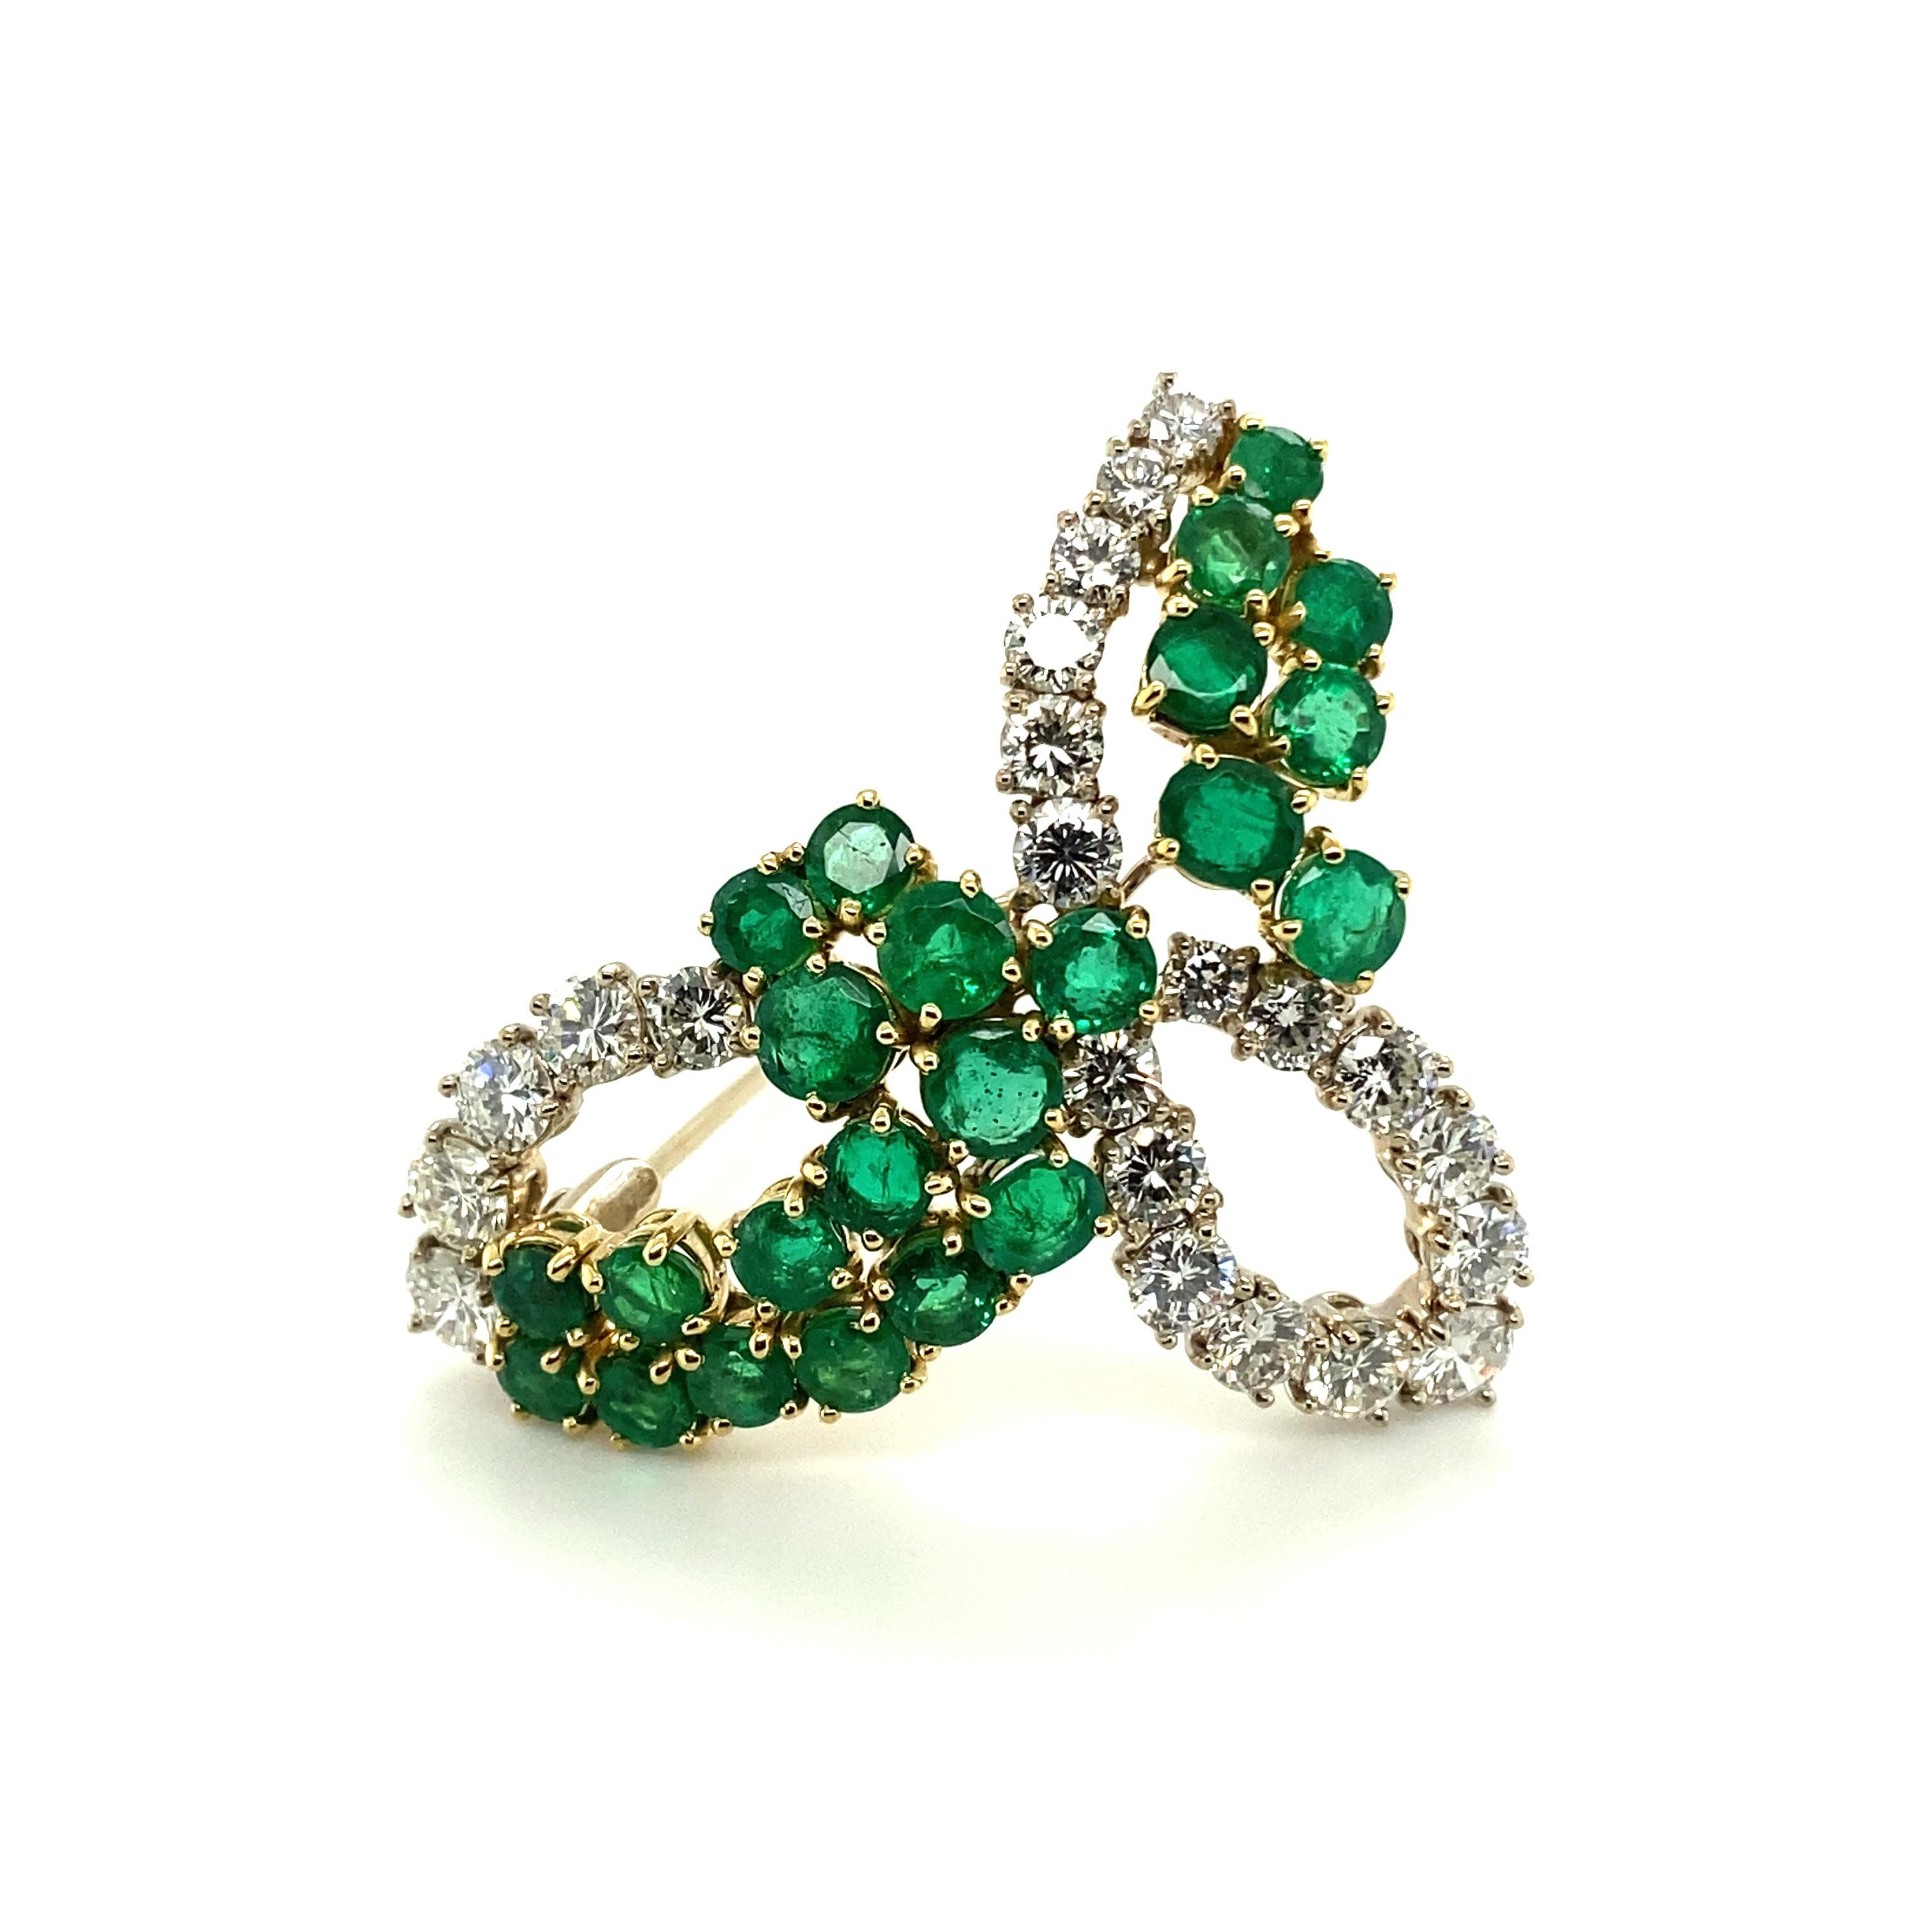 This beautiful leaf-shaped brooch in 18 karat white and yellow gold is prong-set with 23 luminous, round-cut emeralds with a total weight of approximately 4.20 carats and 22 brilliant-cut diamonds of G/H colour and vs/si clarity with a total weight